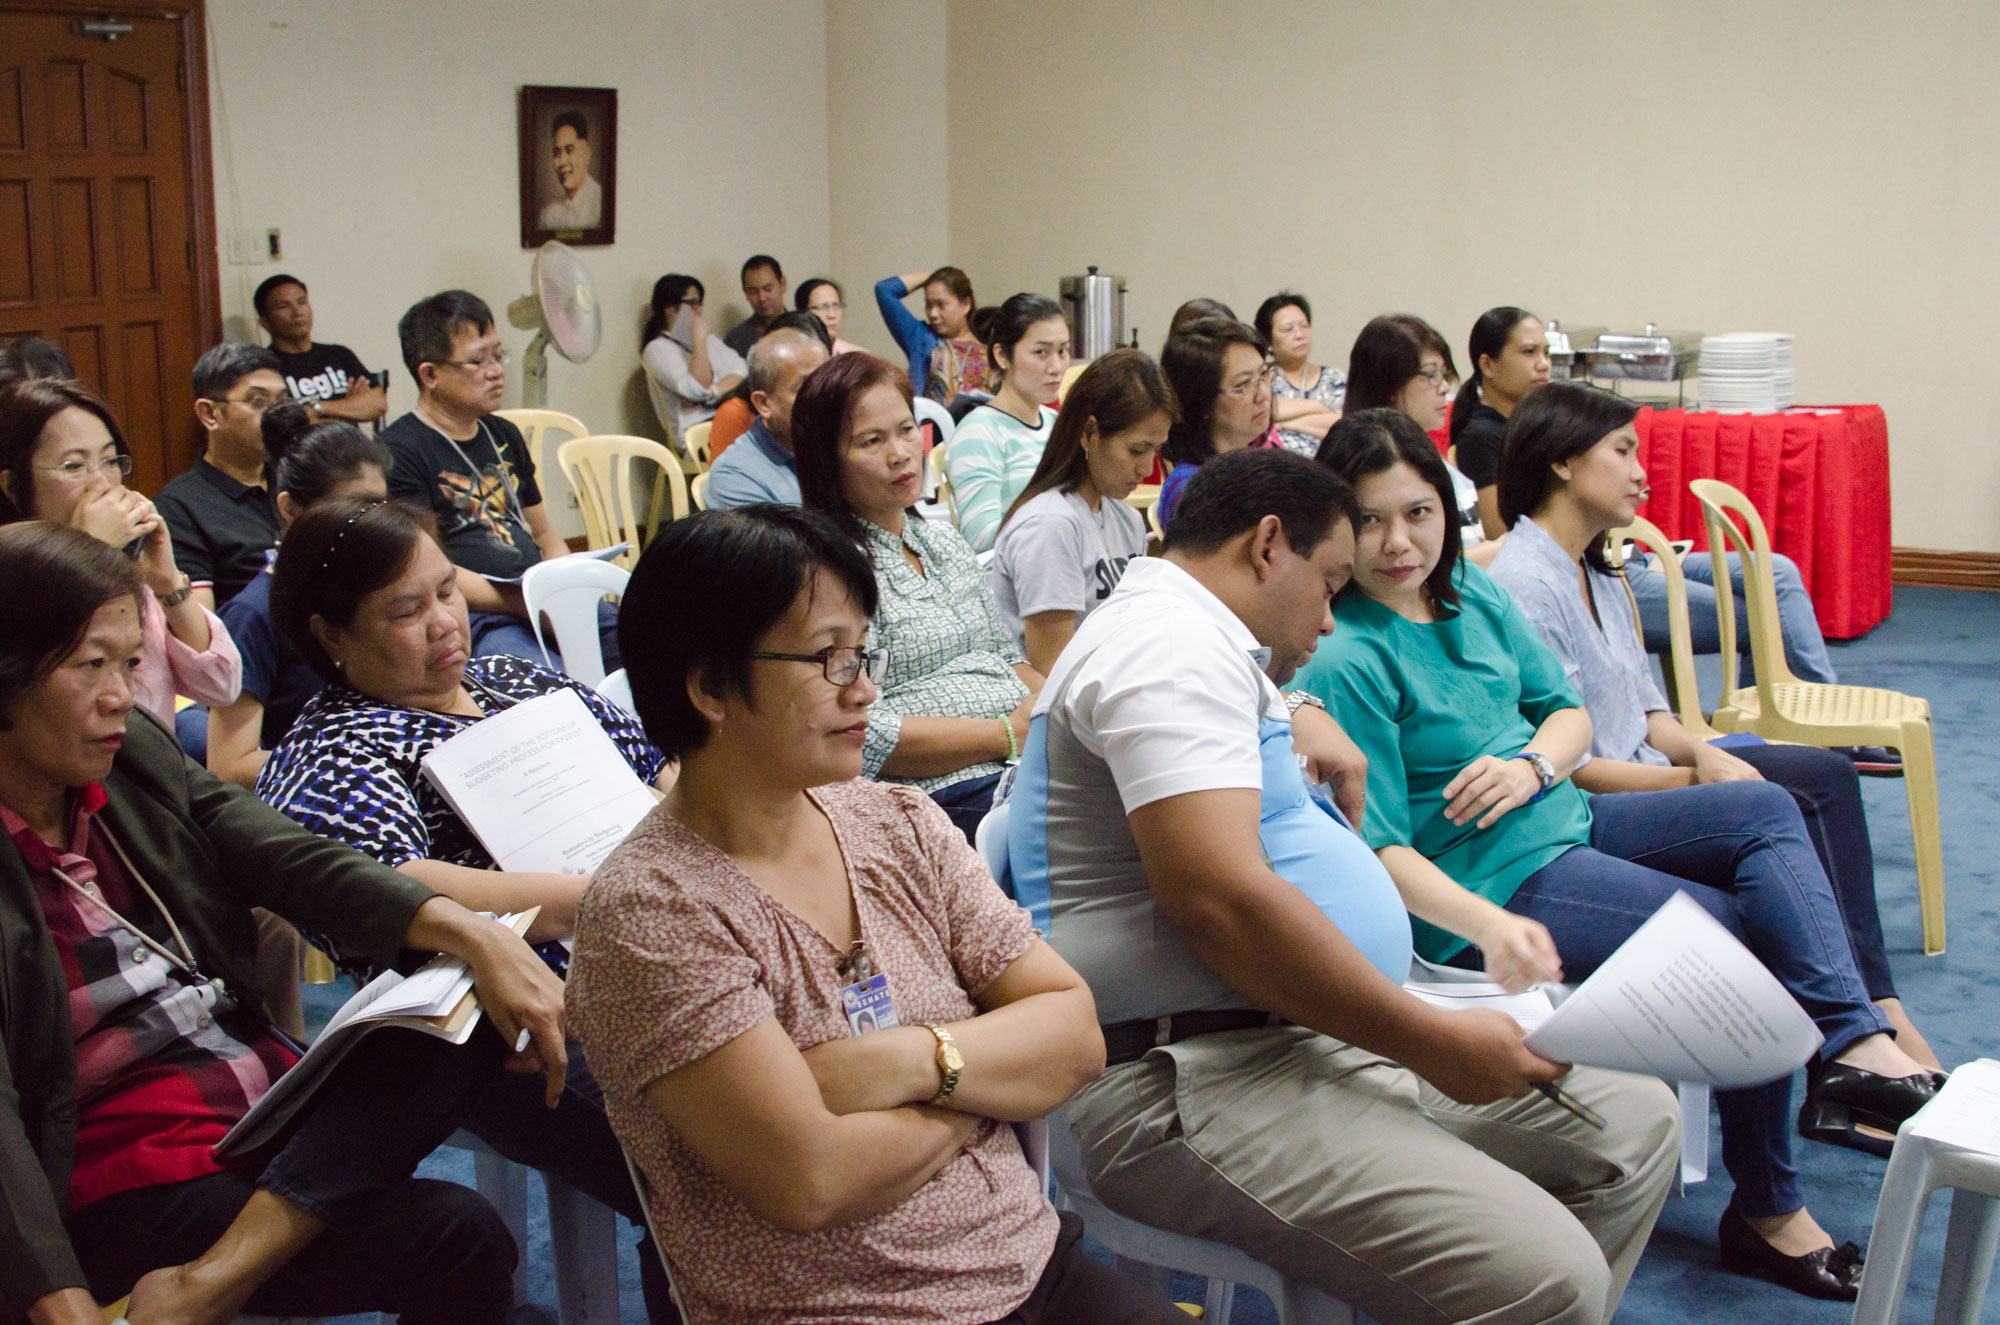 Senate Centennial Lecture Series Assessment Of The Bottom-Up Budgeting Process For FY 2015-GGM_7975.jpg